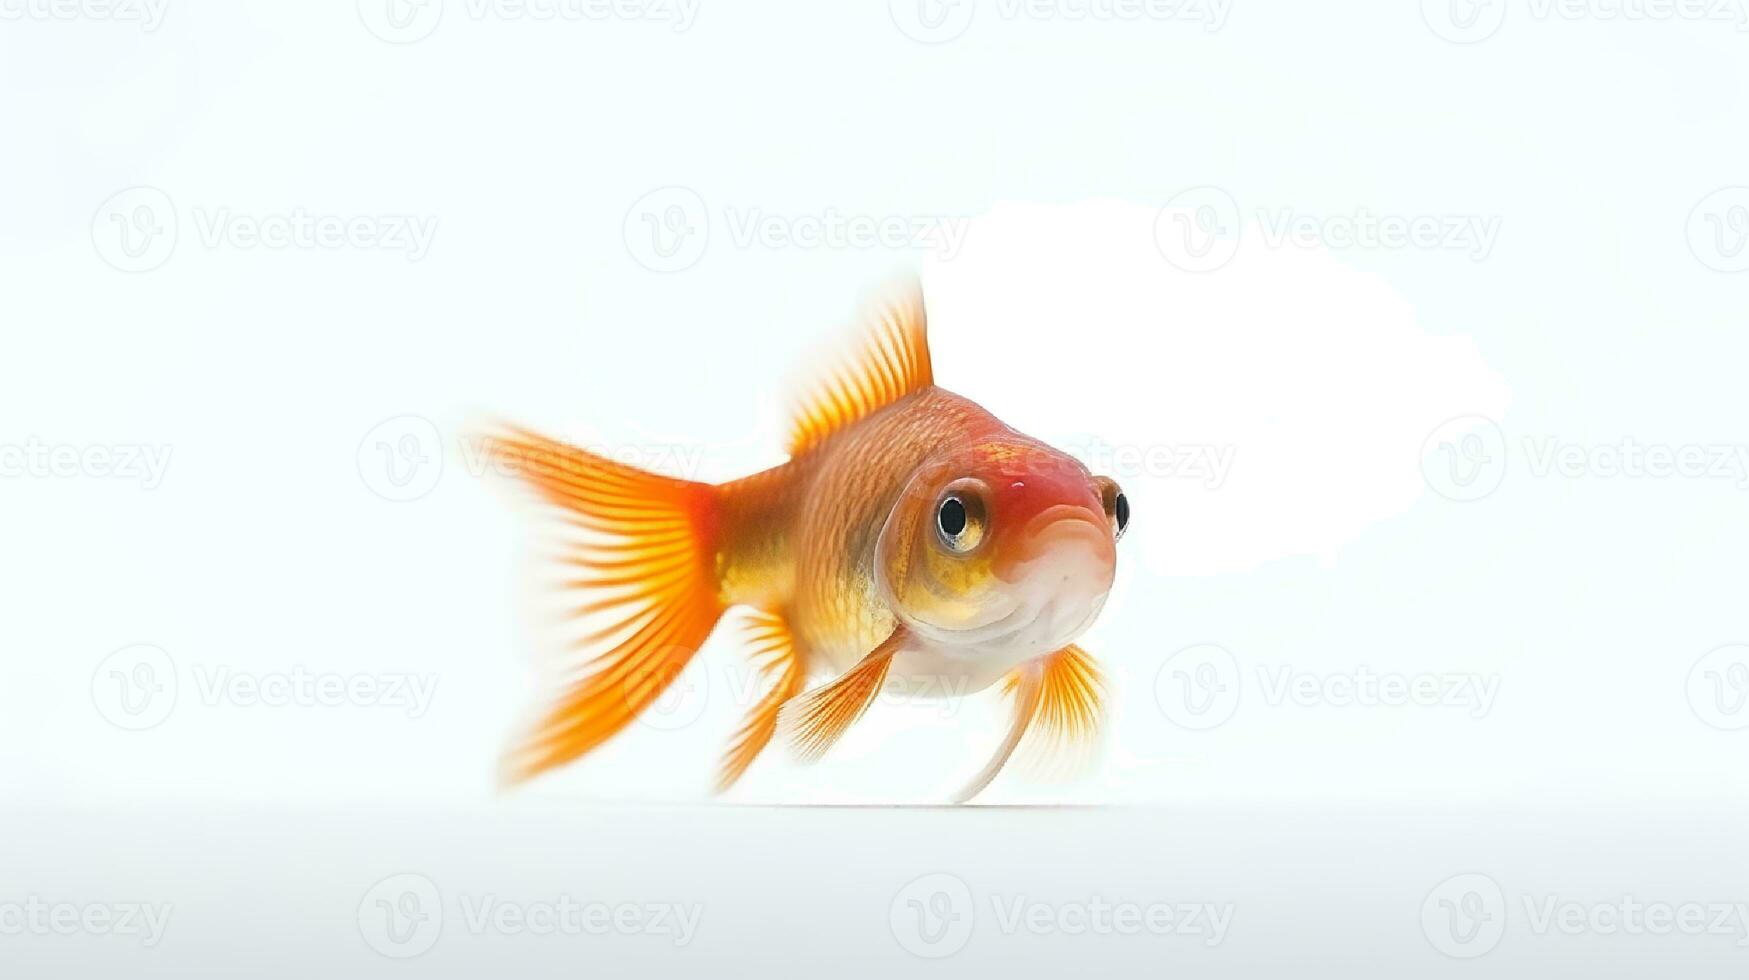 Photo of a molly fish on white background